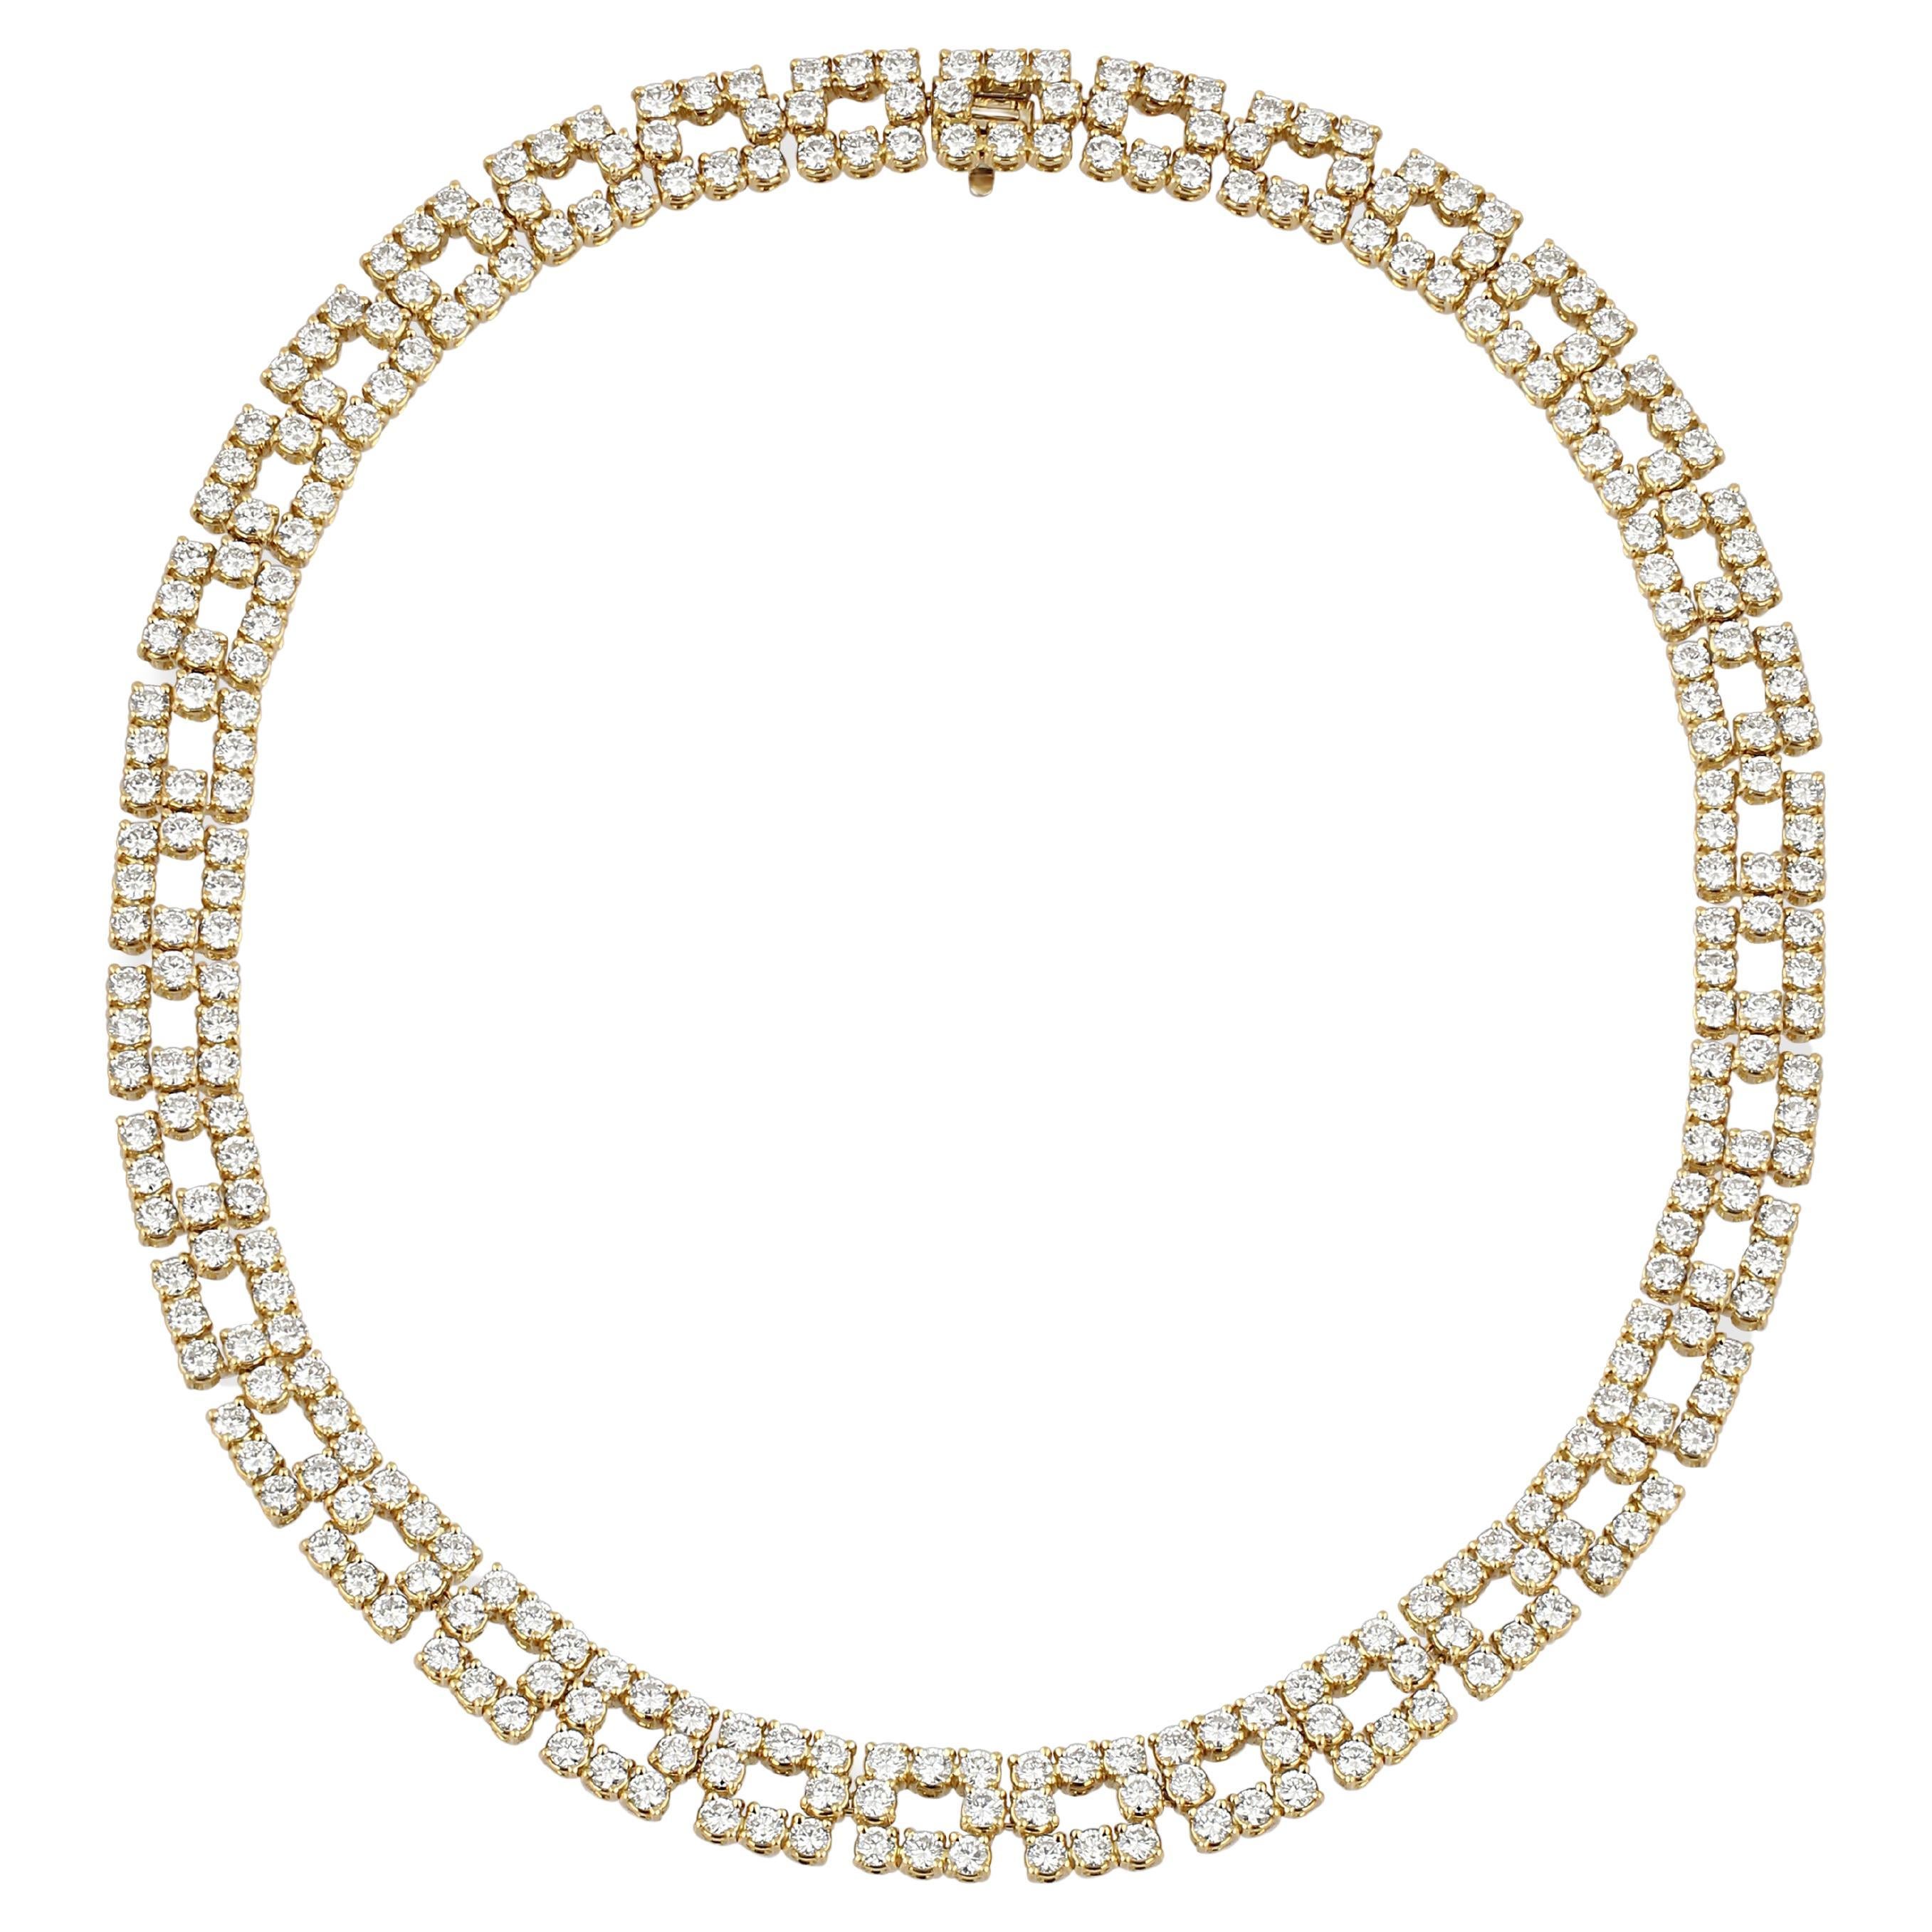 20ct Diamond Necklace in 18k Yellow Gold